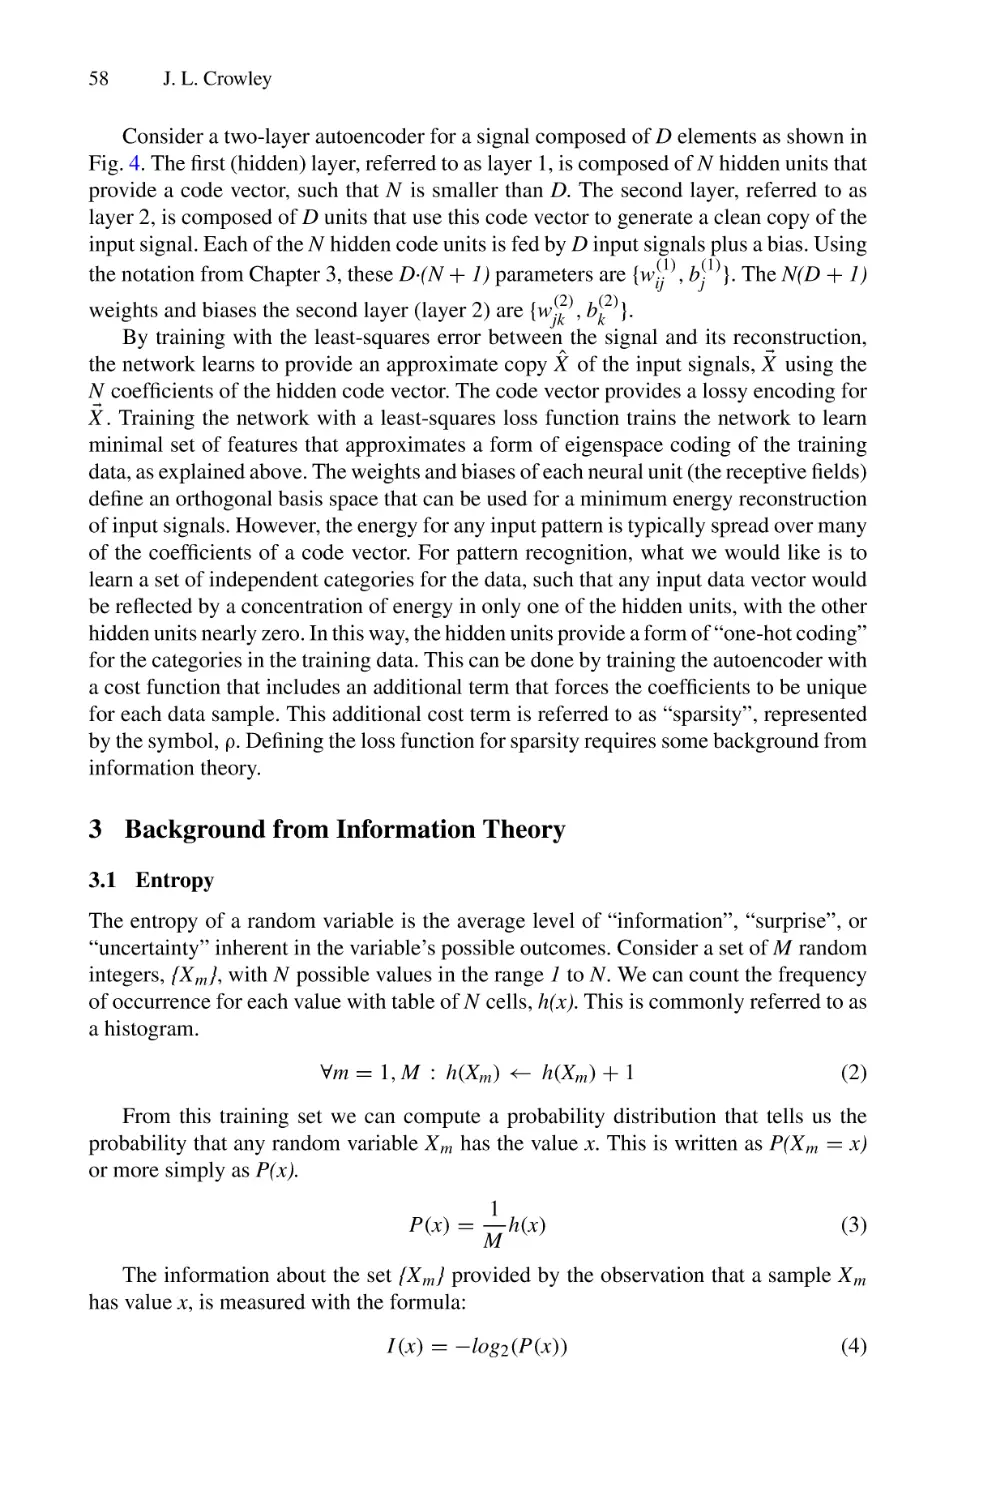 3 Background from Information Theory
3.1 Entropy